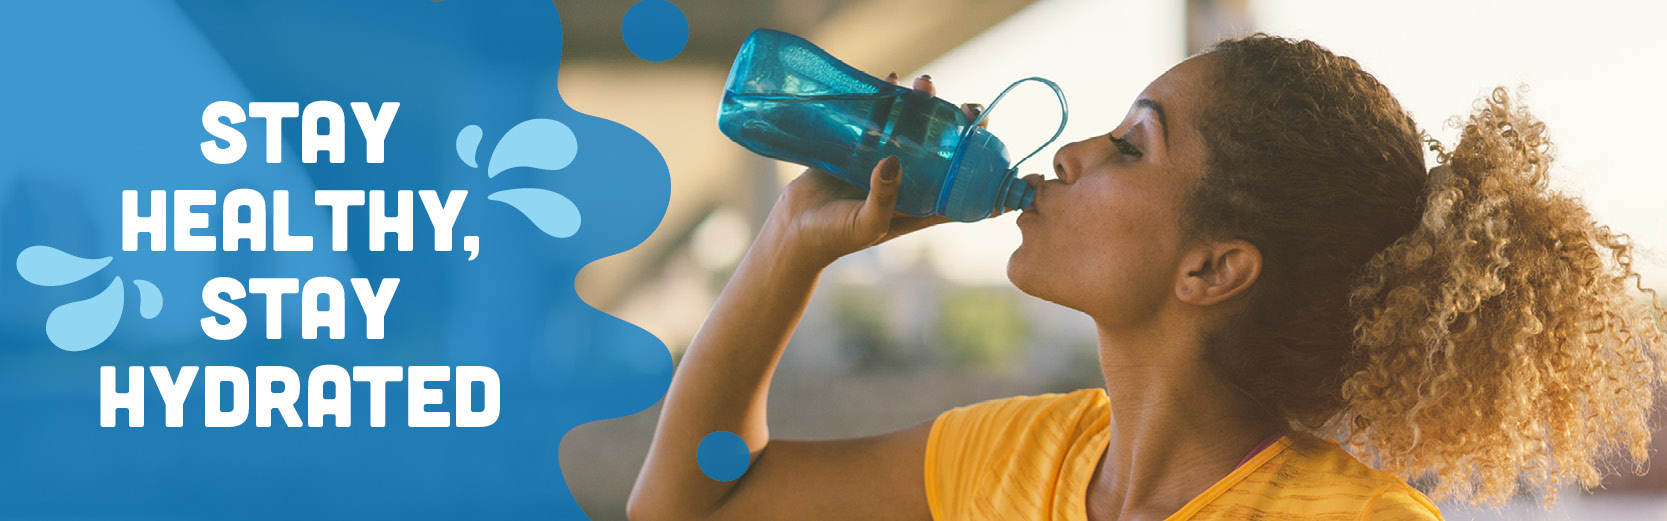 10 Tips for Staying Hydrated During the Summer Heat